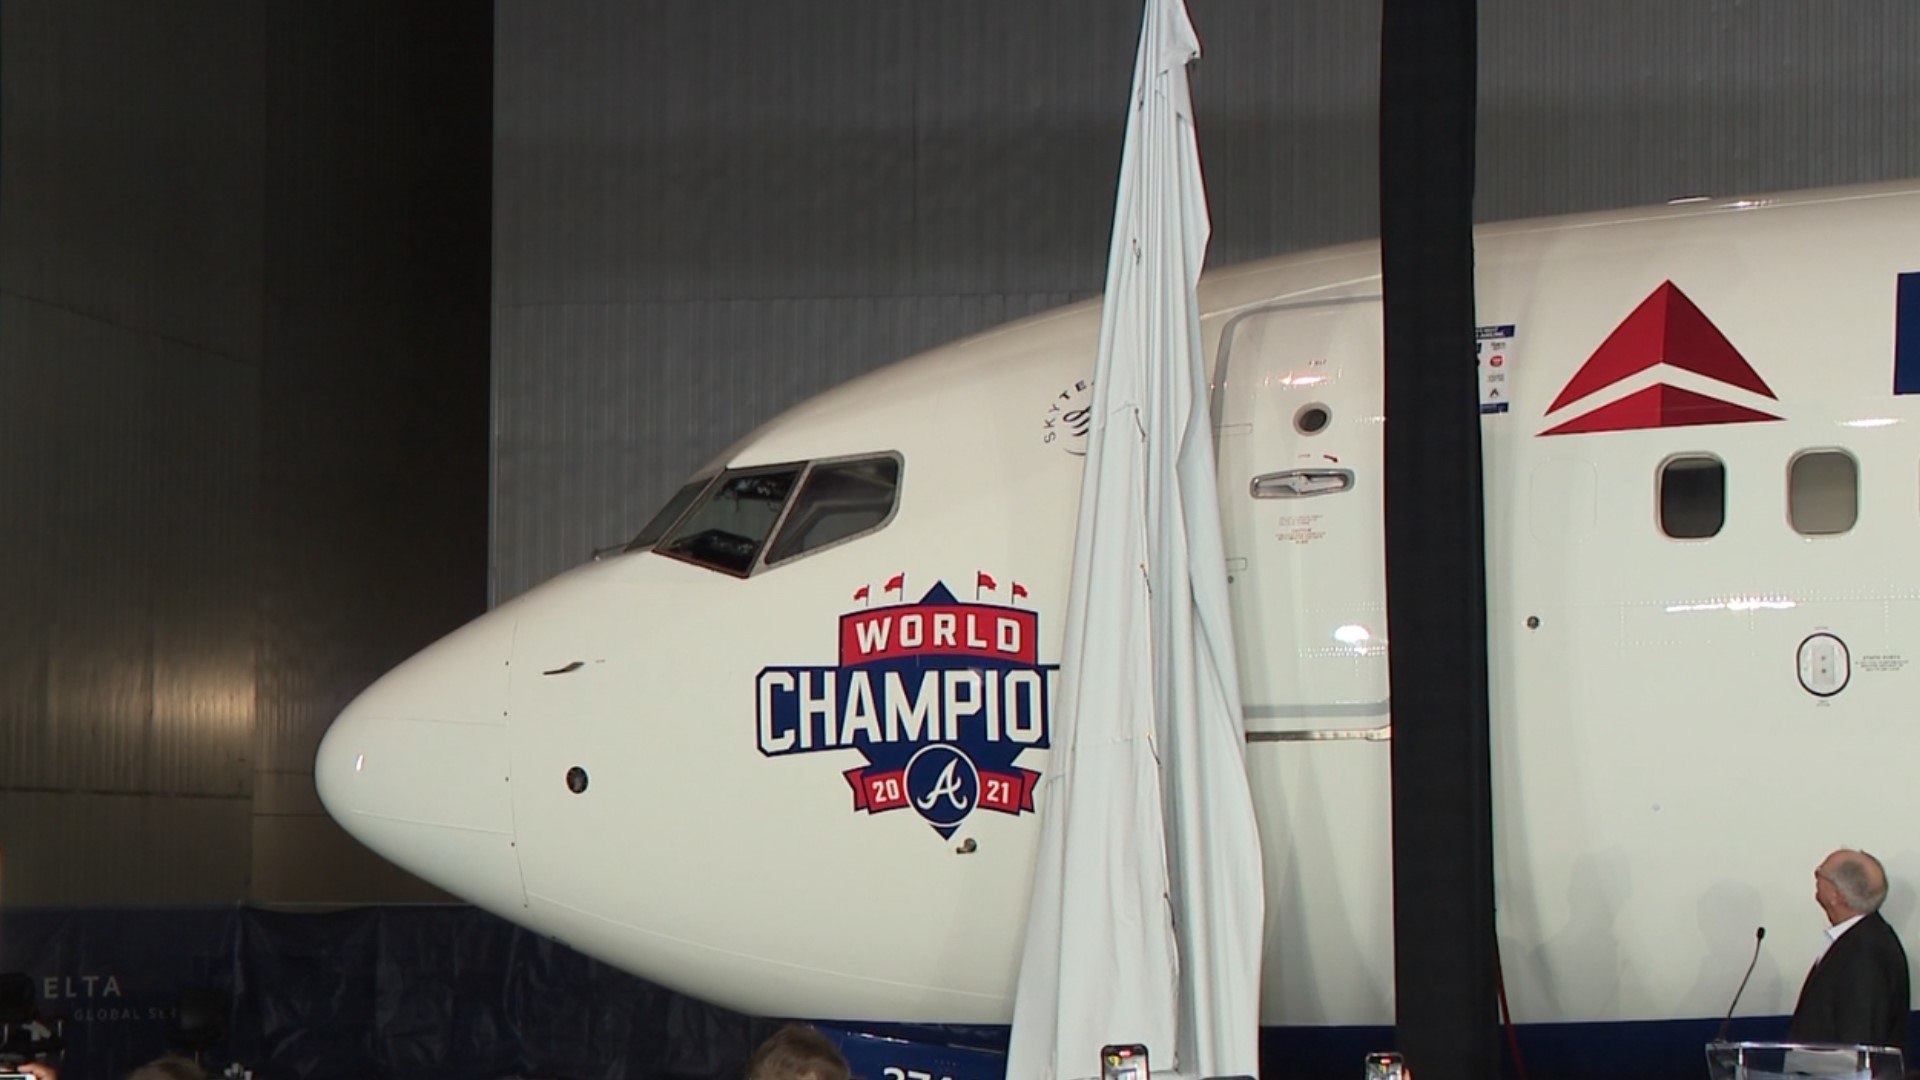 Atlanta-based Delta Air Lines has dedicated a plan to our very own 2021 World Series Champs!